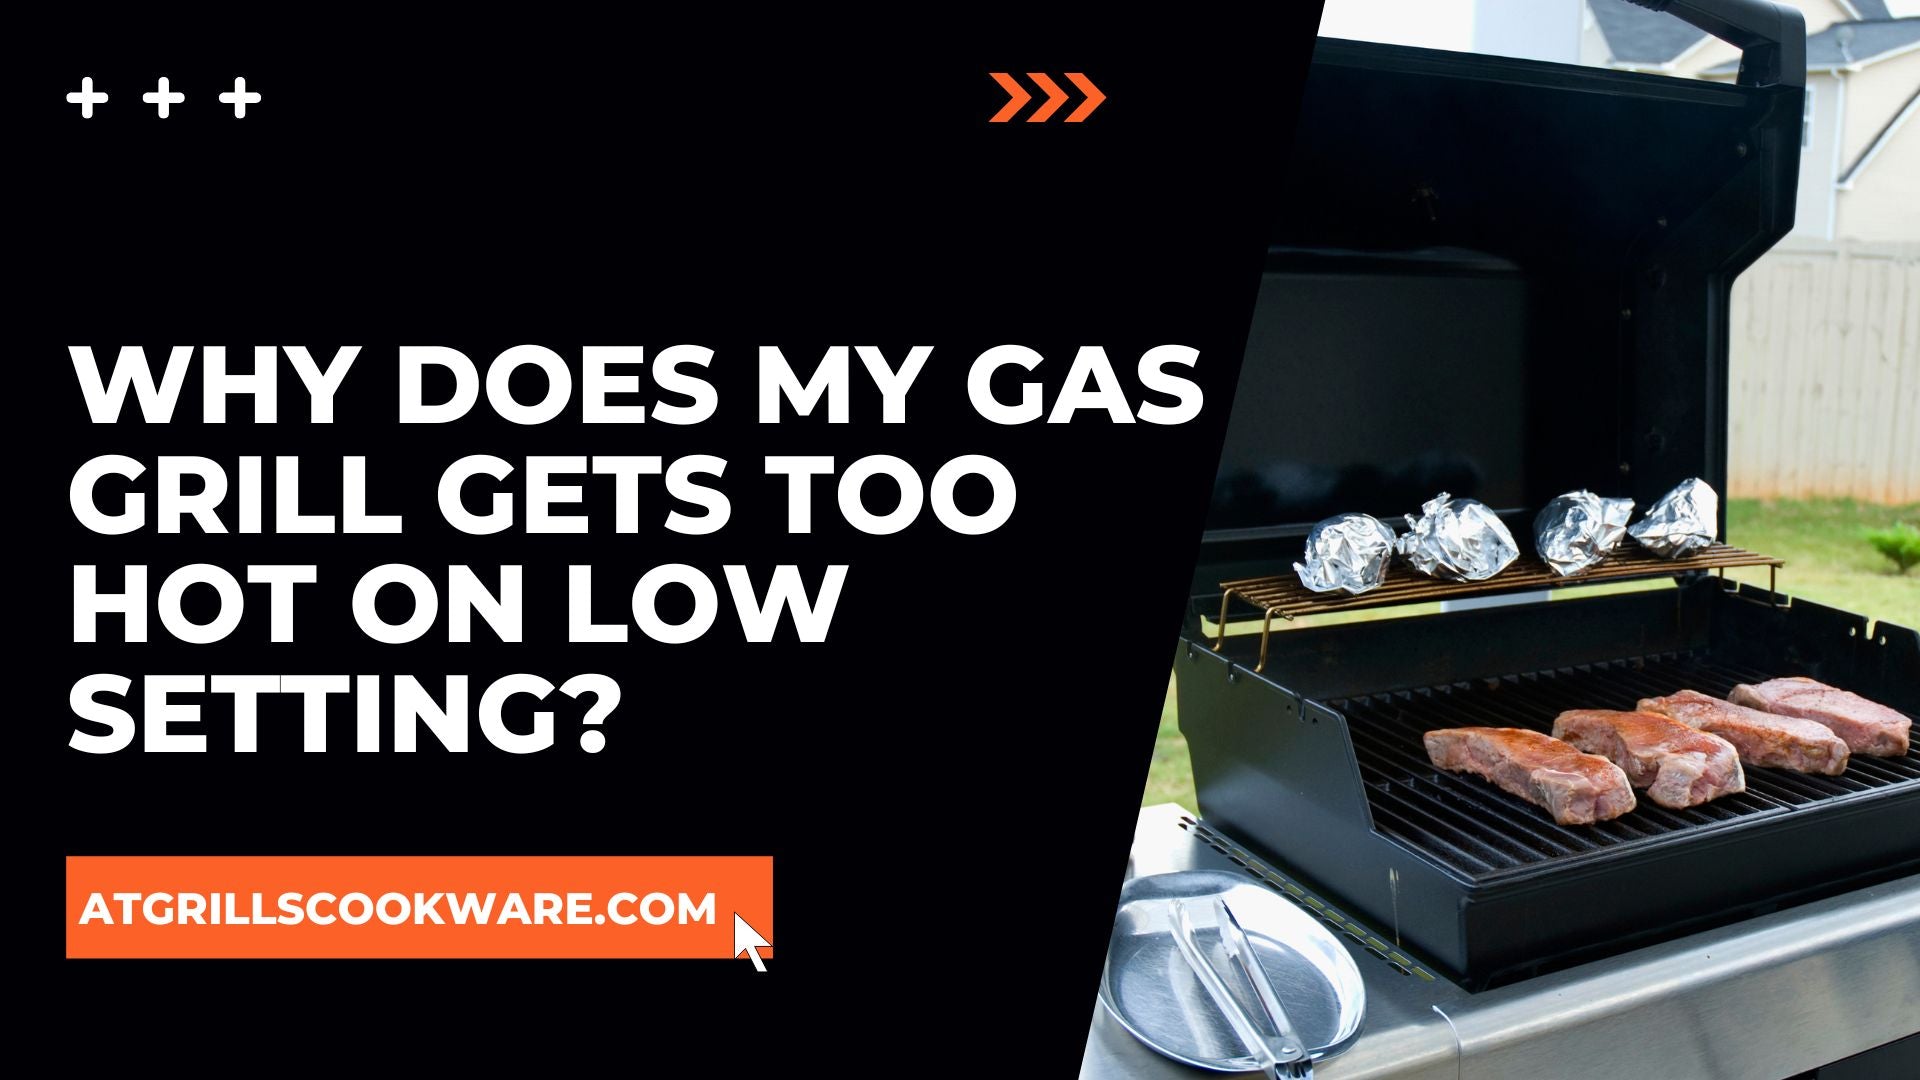 Why Does My Gas Grill Gets Too Hot On Low Setting